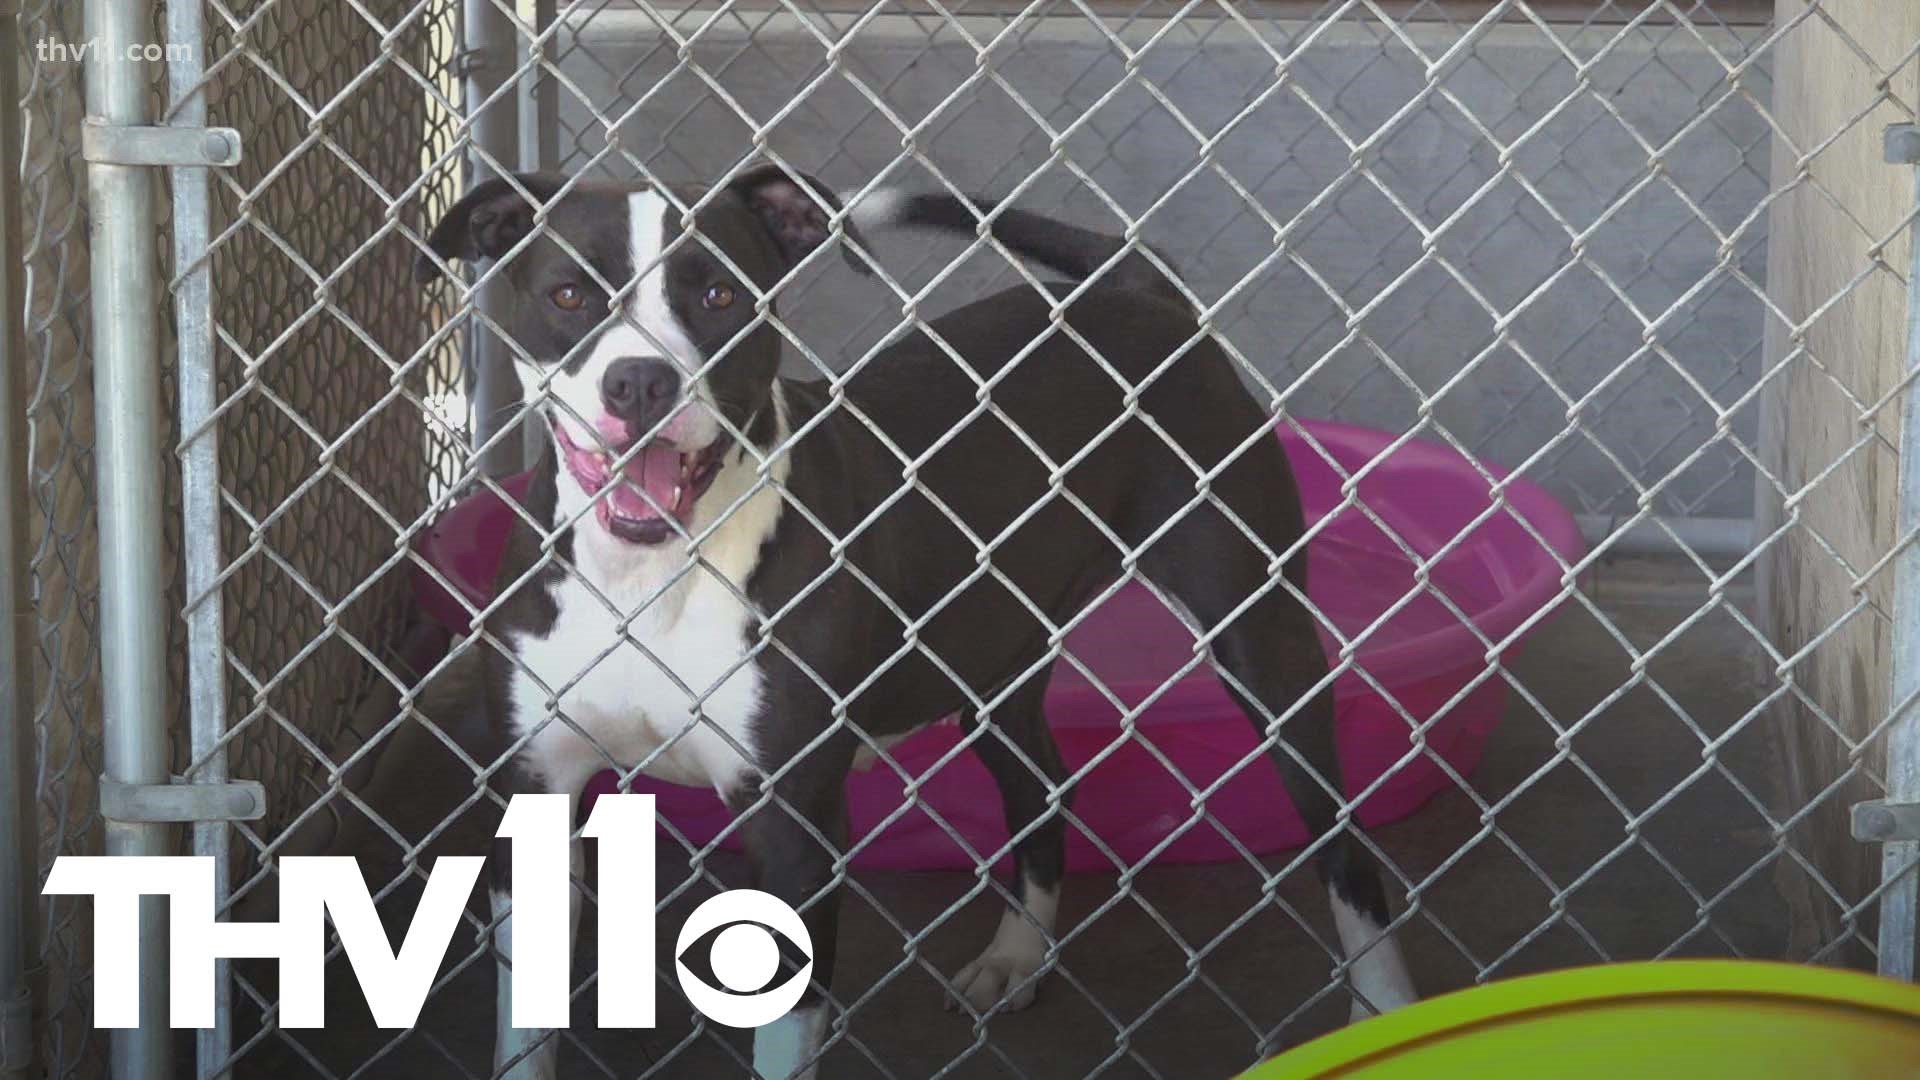 After banning pit bulls years ago, Jacksonville city officials are reconsidering their stance on the breed's future.